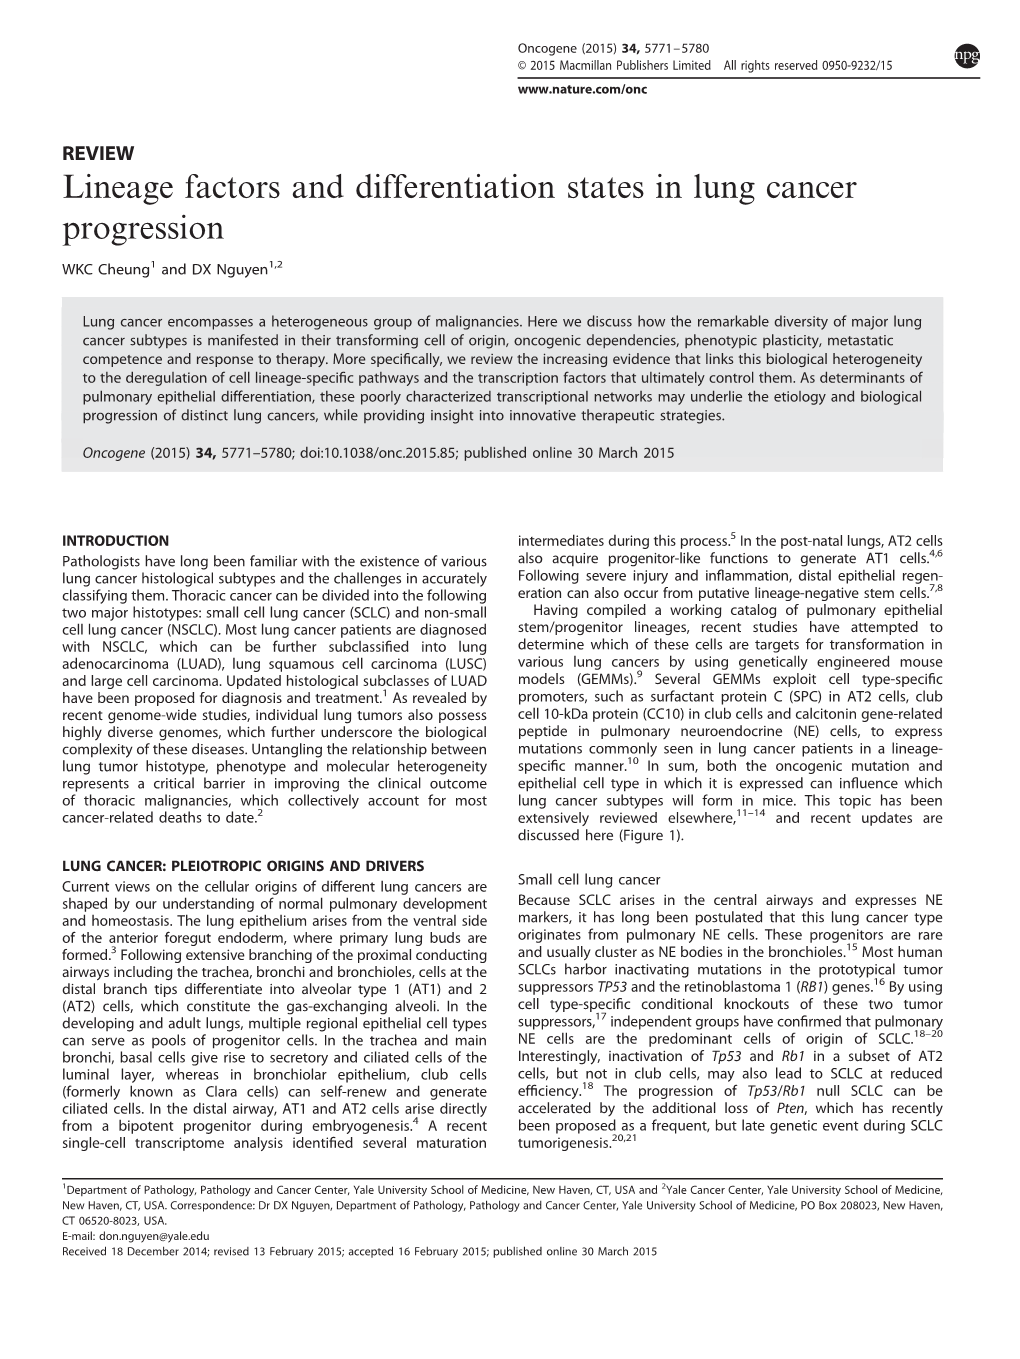 Lineage Factors and Differentiation States in Lung Cancer Progression